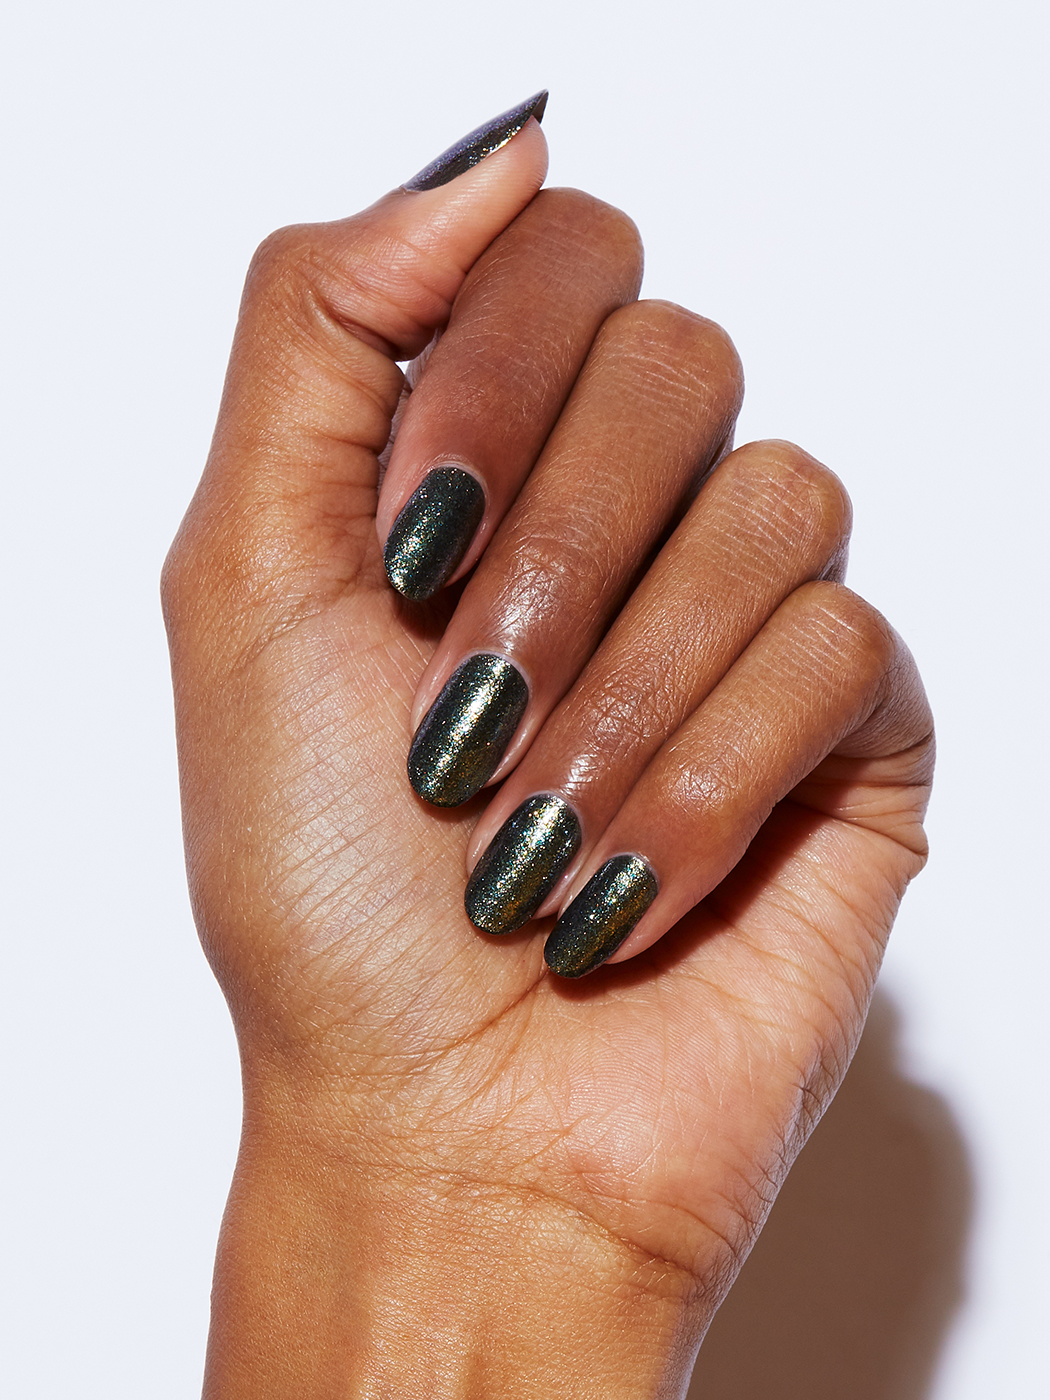 Black with fine green and gold glitter mix, Full coverage, Rich